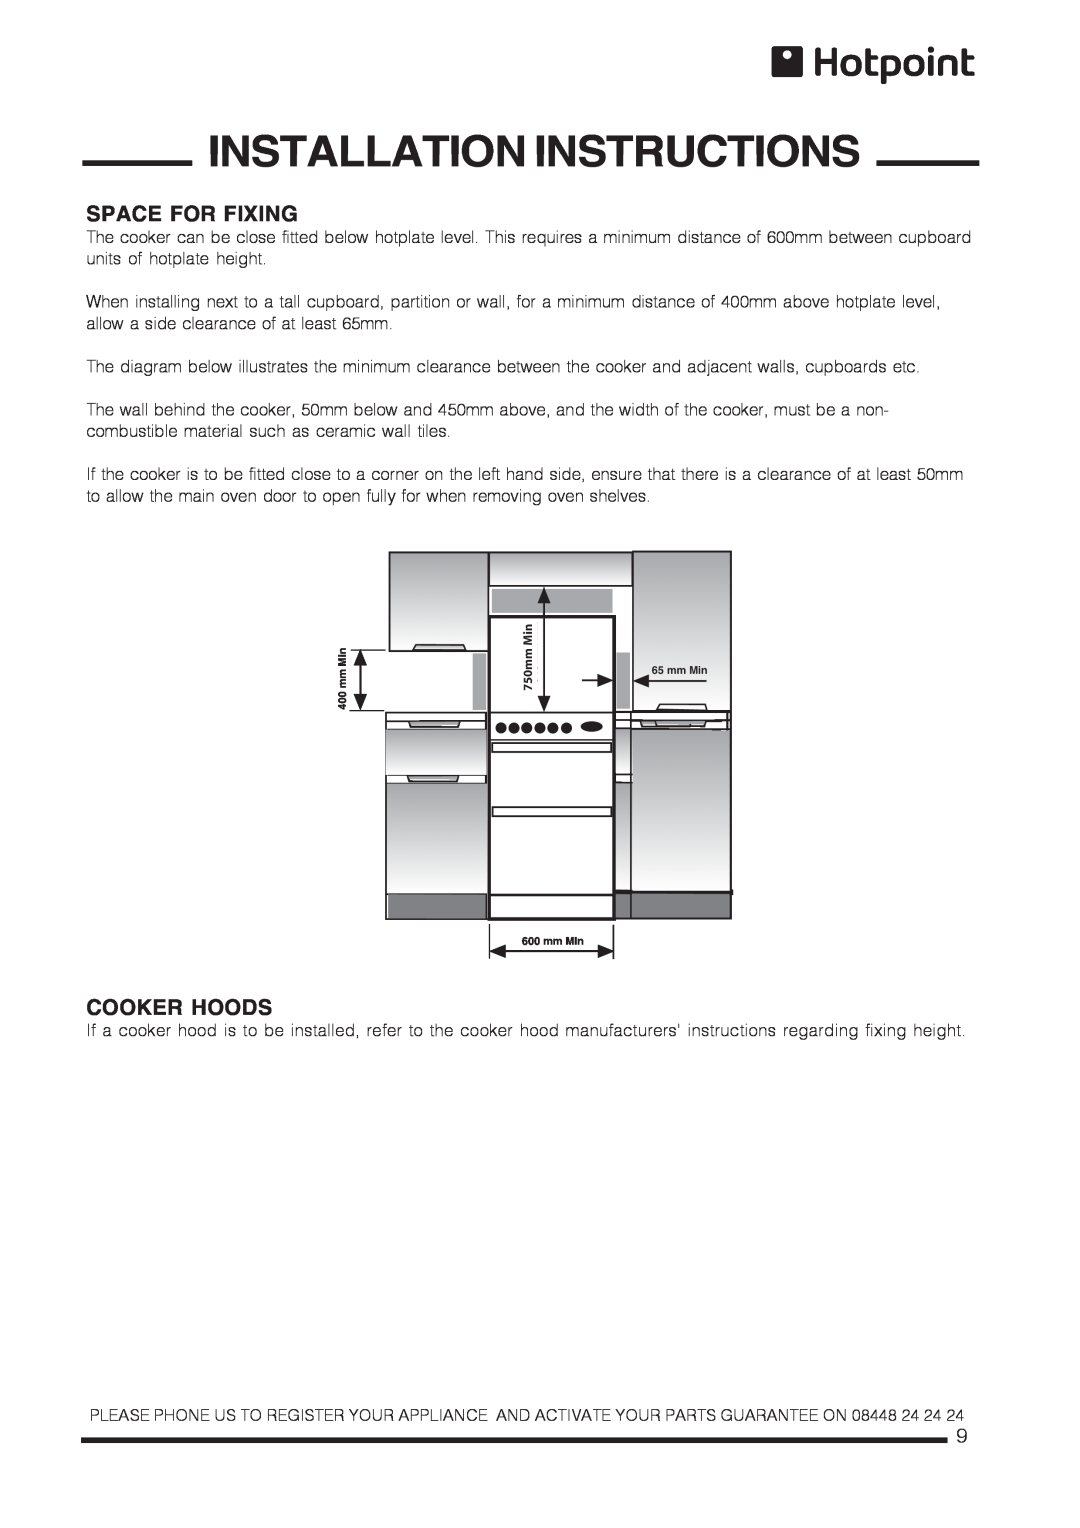 Xerox CH60DTCF, CH60DTXF, CH60DPXF, CH60DPCF Installation Instructions, Space For Fixing, Cooker Hoods 